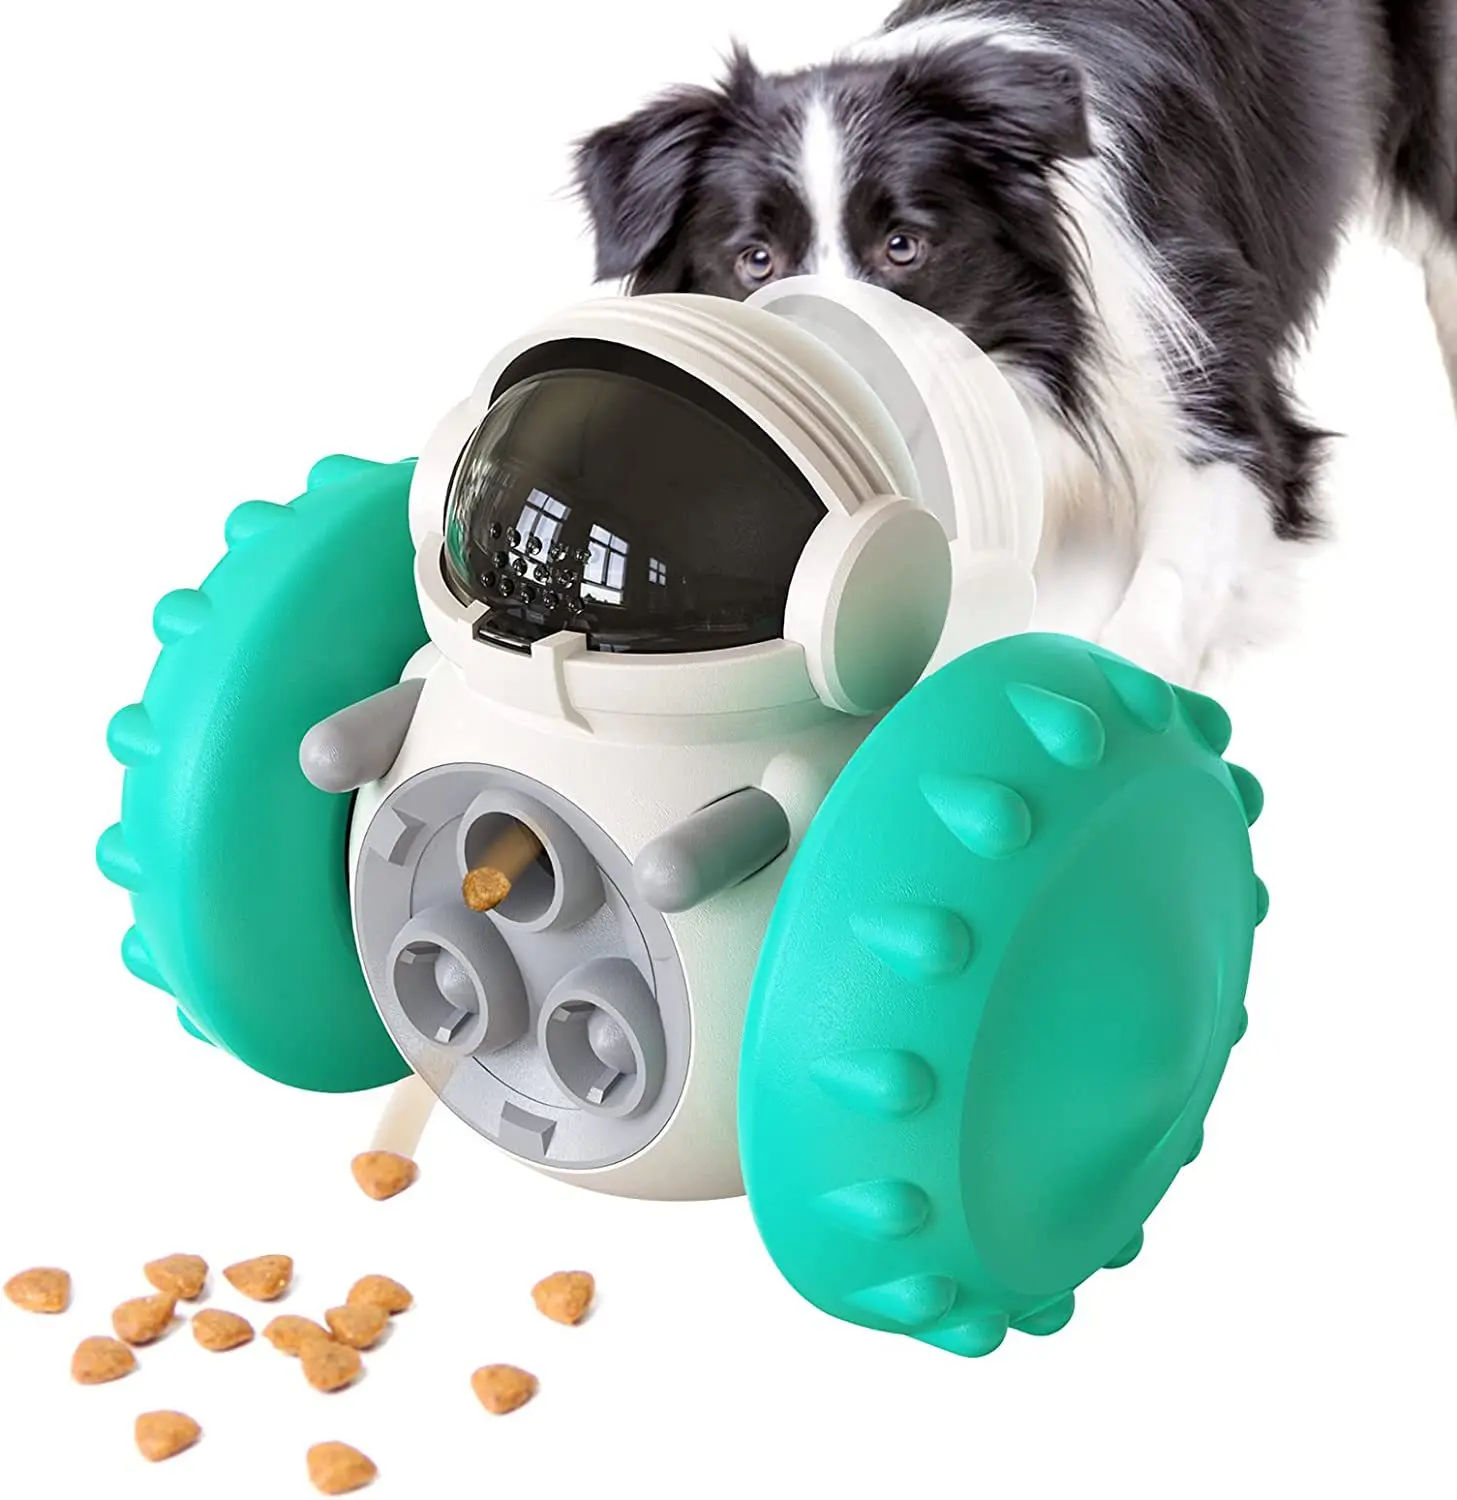 

New Style Dog Treat Puzzle Balance Car Toys Interactive Treat Food Dispenser Robot Wheel Slow Feeder Toys For Small Medium Dogs